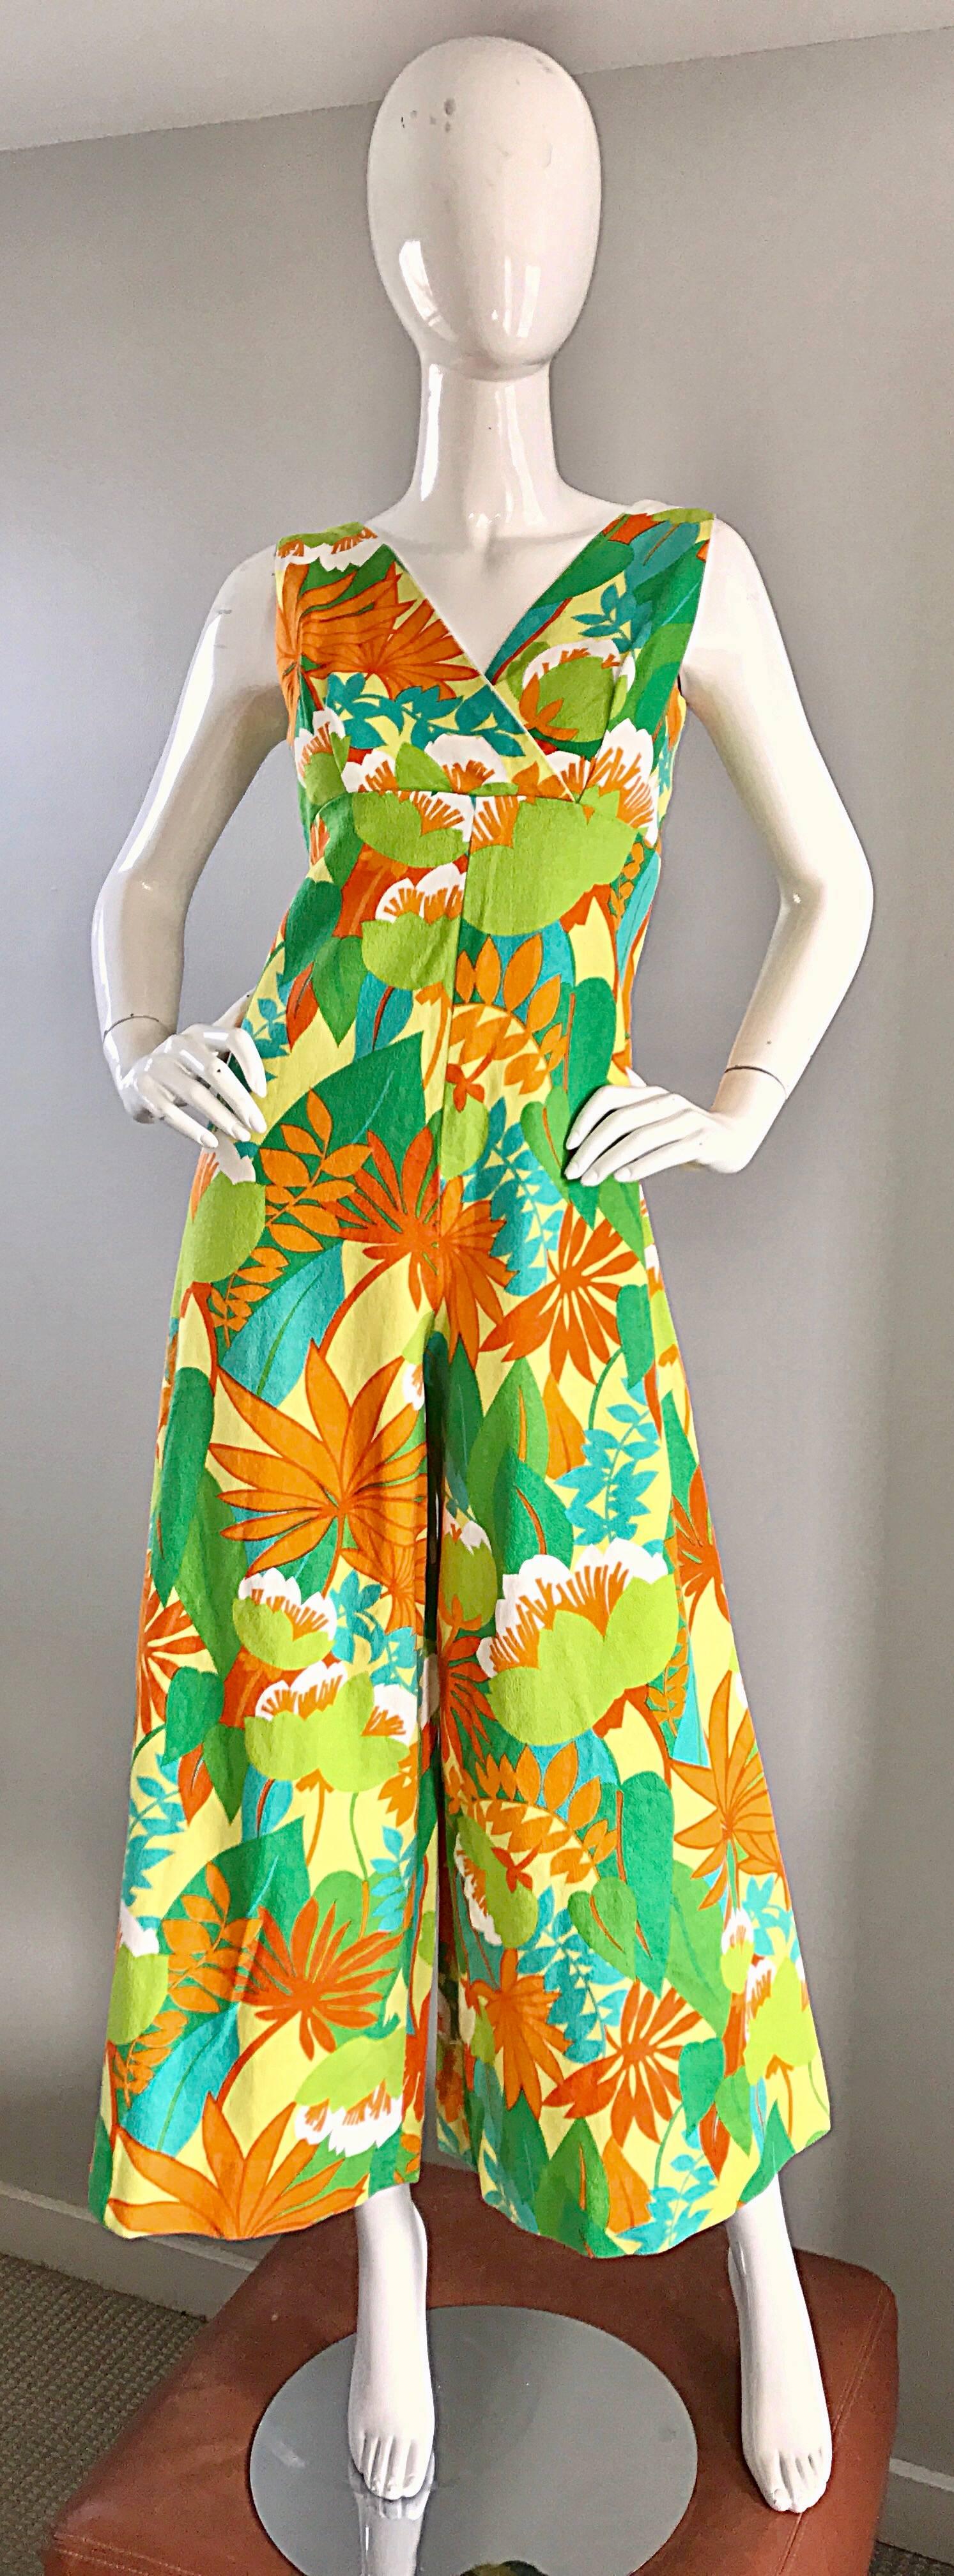 Amazing vintage 1970s neon tropical print wide leg jumpsuit! Features allover tropical prints in bright hues of orange, green, and yellow. Soft cotton holds shape nicely. Full metal zipper up the back with hook-and-eye closure. Great with sandals,